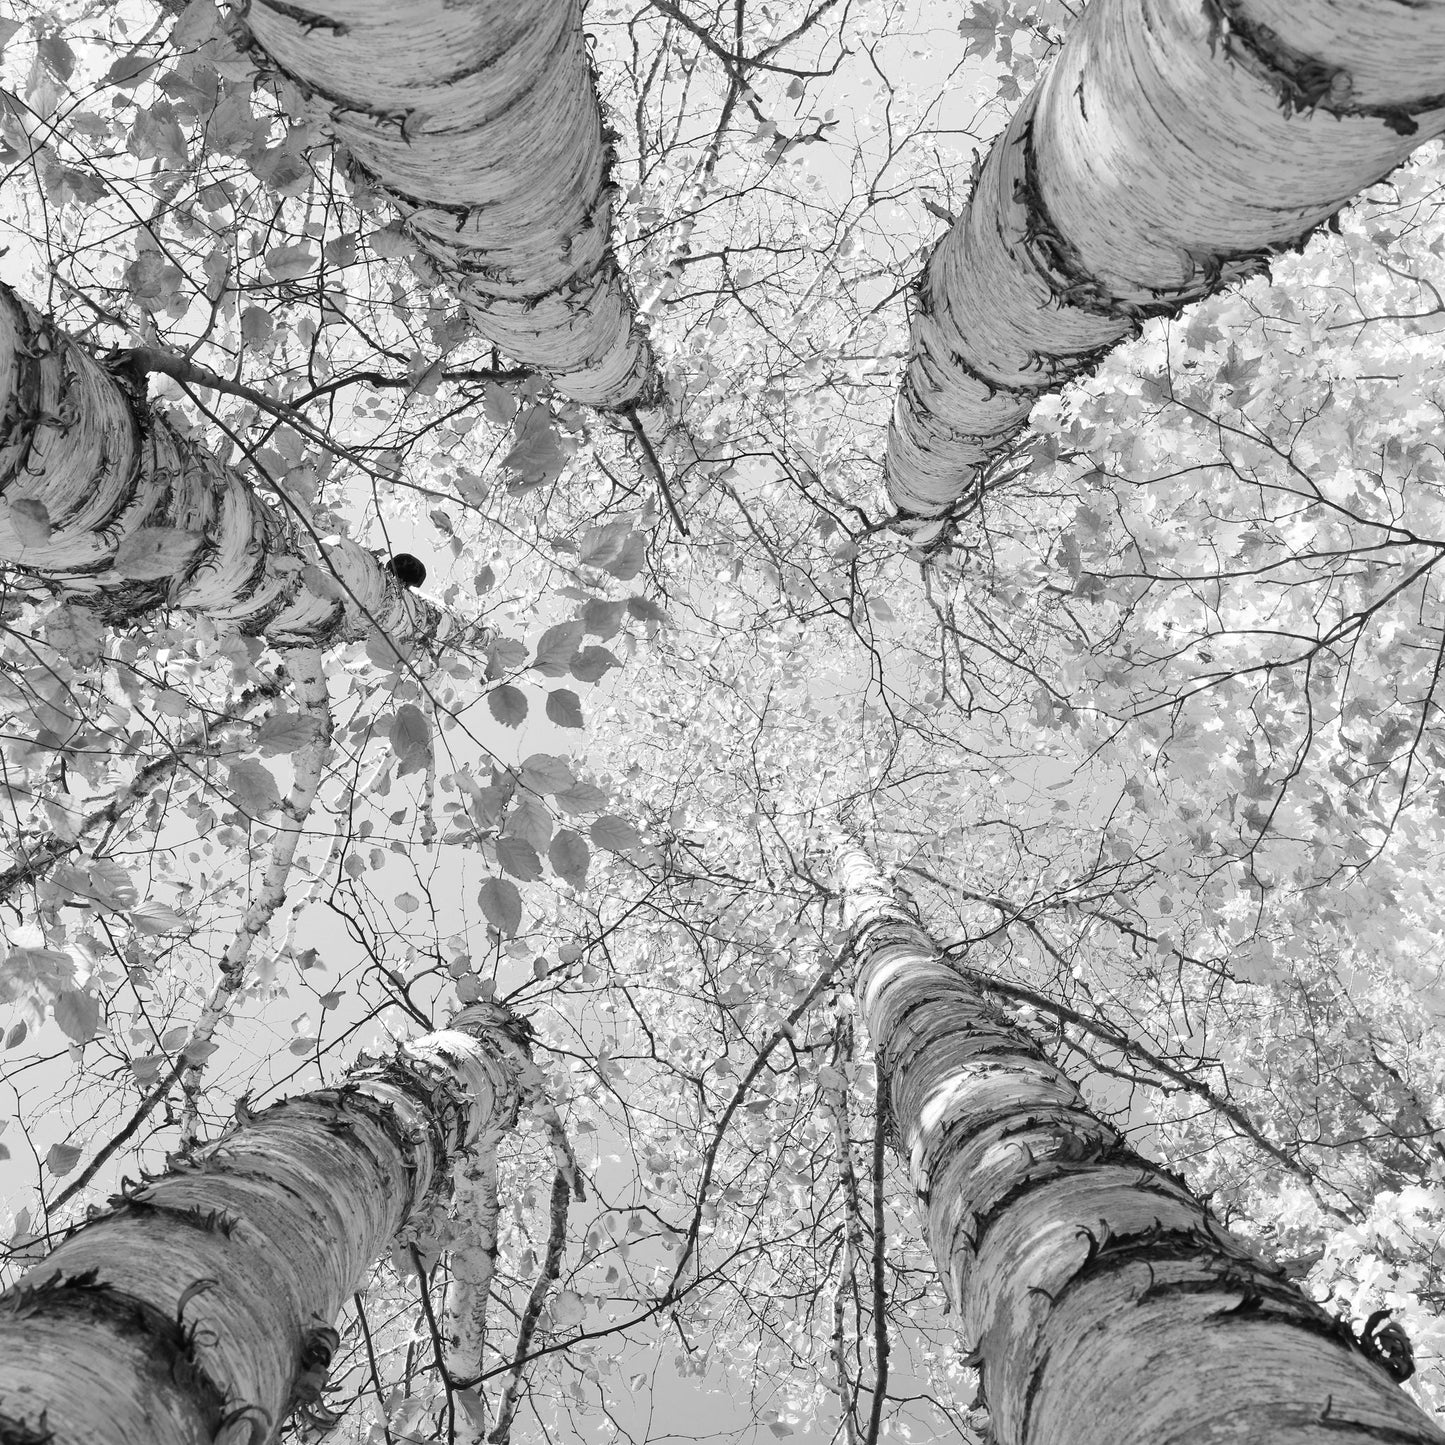 Birch Trees art photo print, black and white tree picture, large photography wall decor, paper or canvas 8x10 16x20 20x20 24x36 30x45 40x60